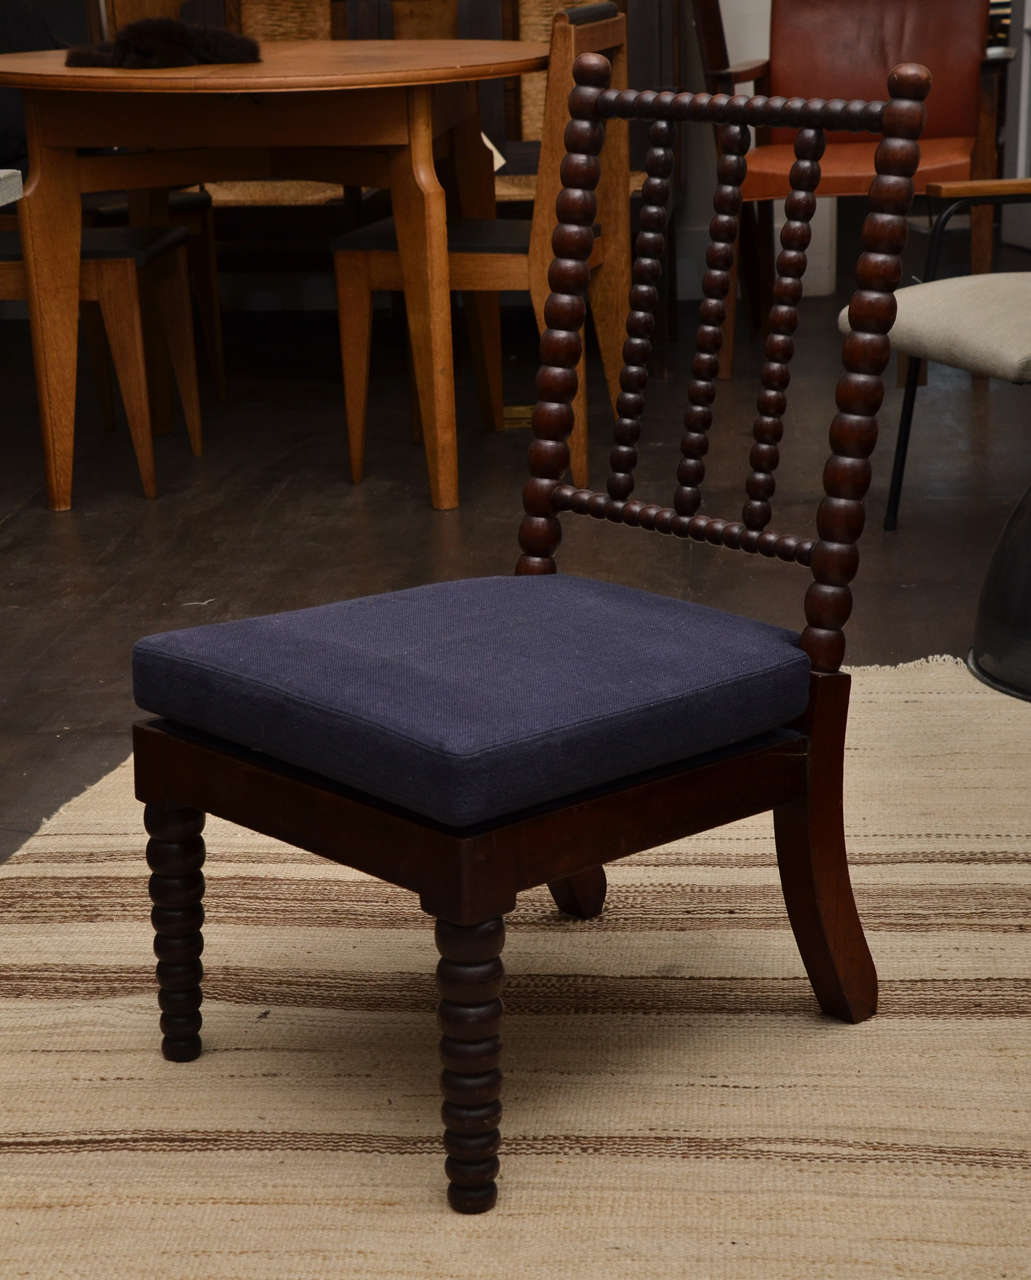 Bobbin style side chair with three-spindle backrest. Newly upholstered navy linen seat cushion.